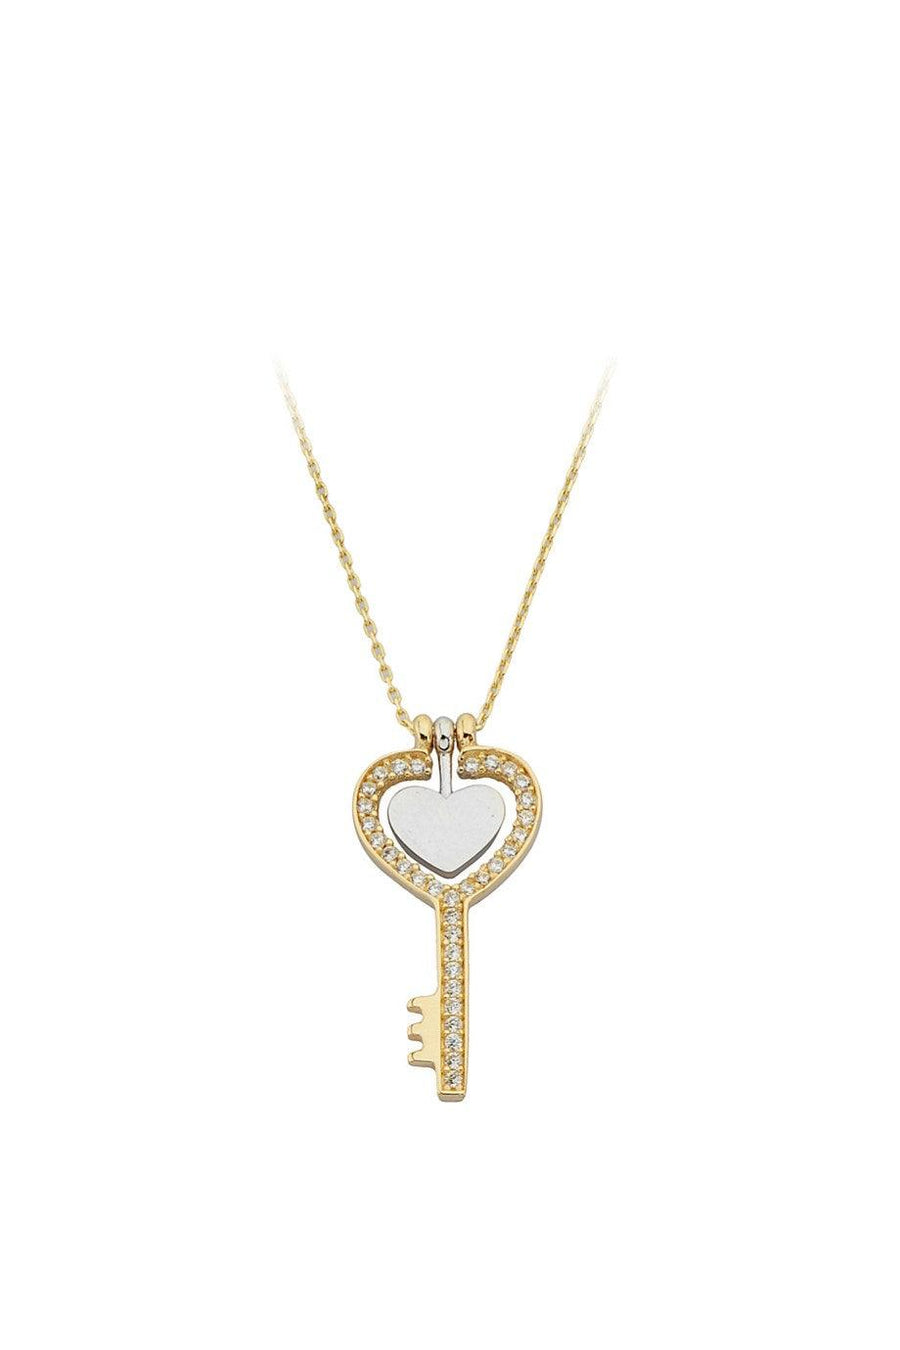 Gold -Hearted Key Necklace